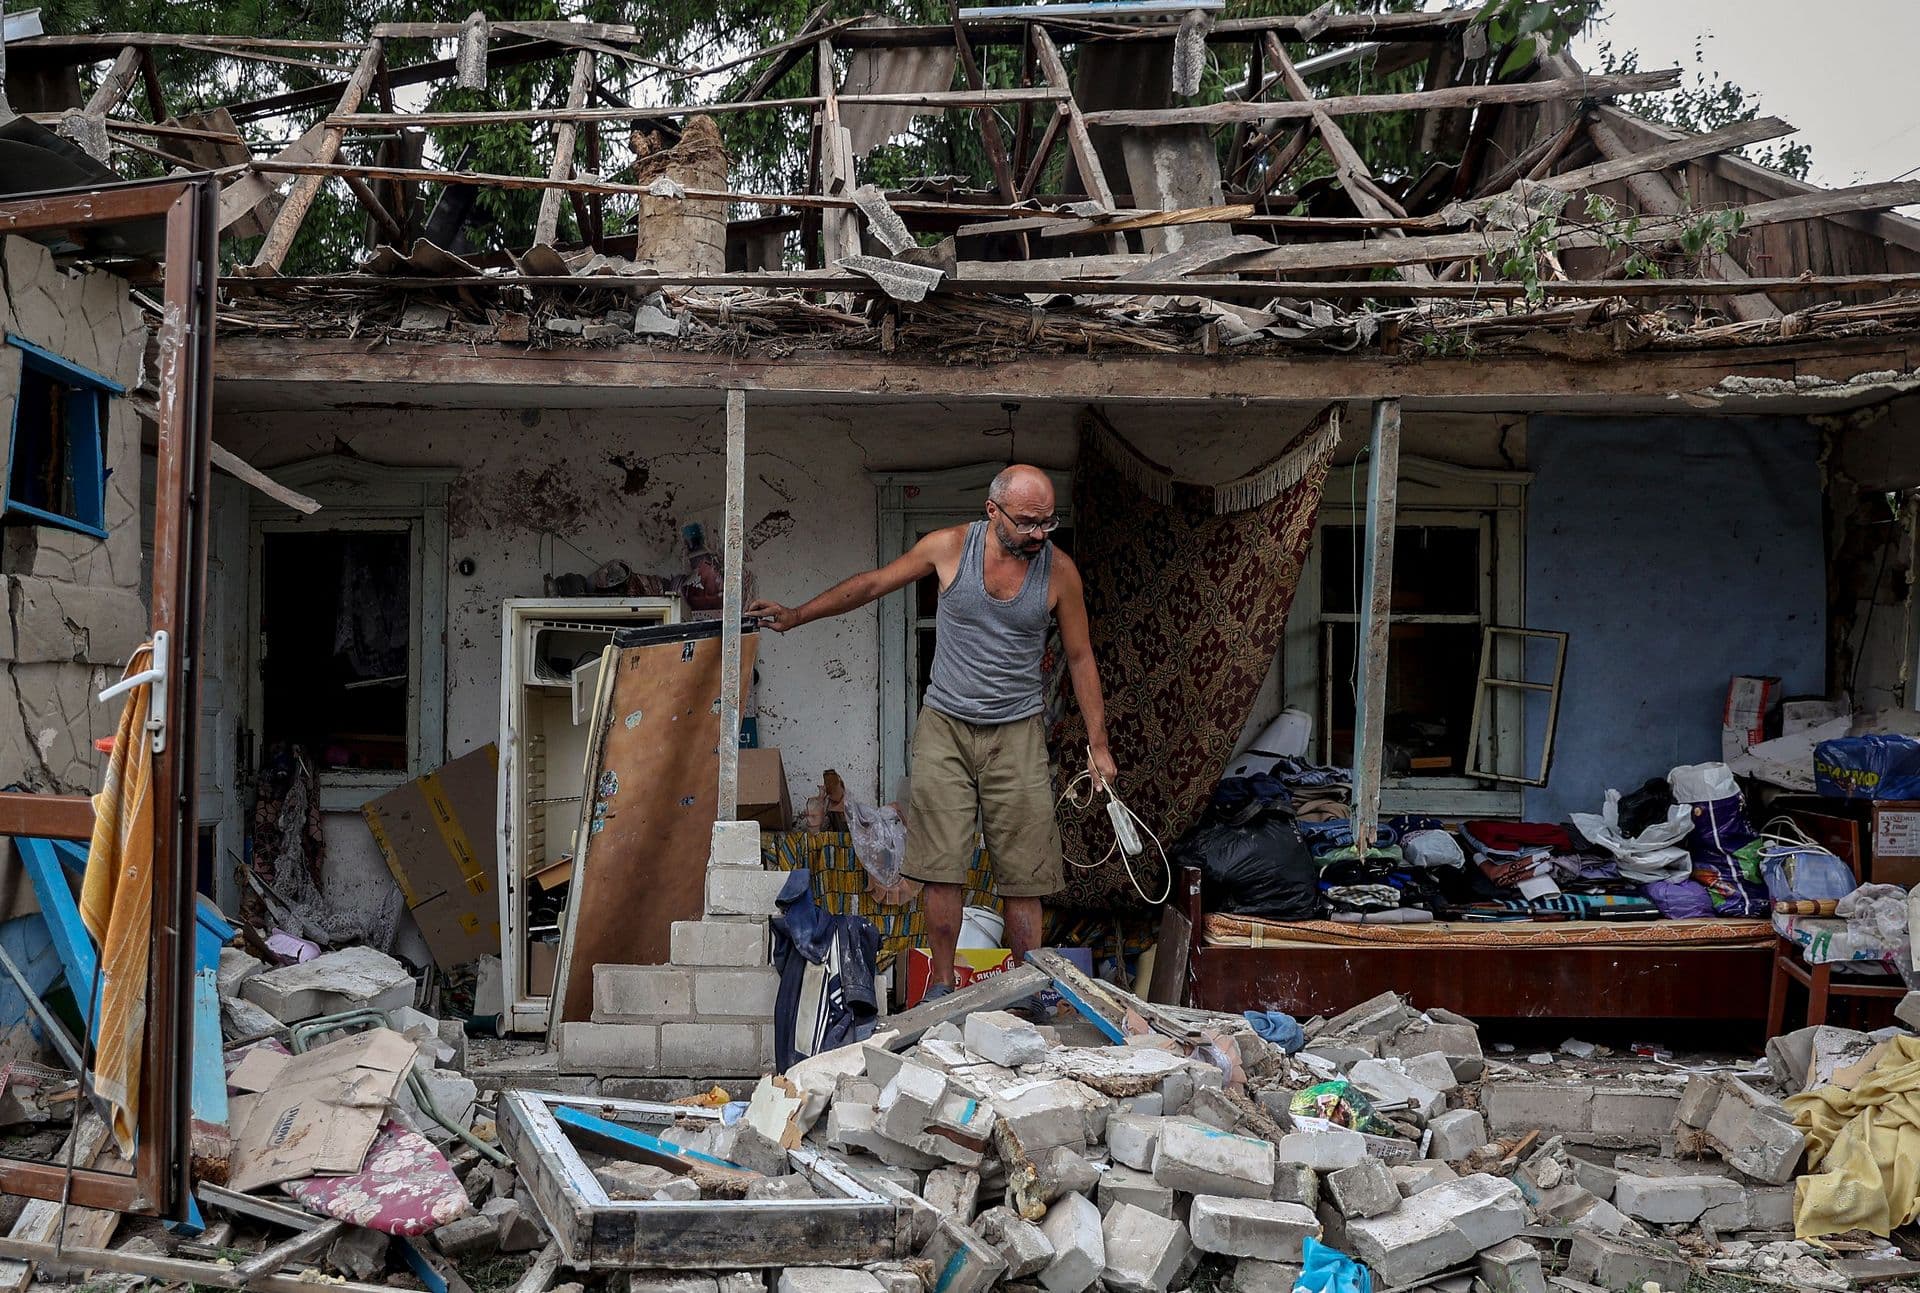 A man collects belongings from his destroyed house after a missile attack in the town of Kramatorsk